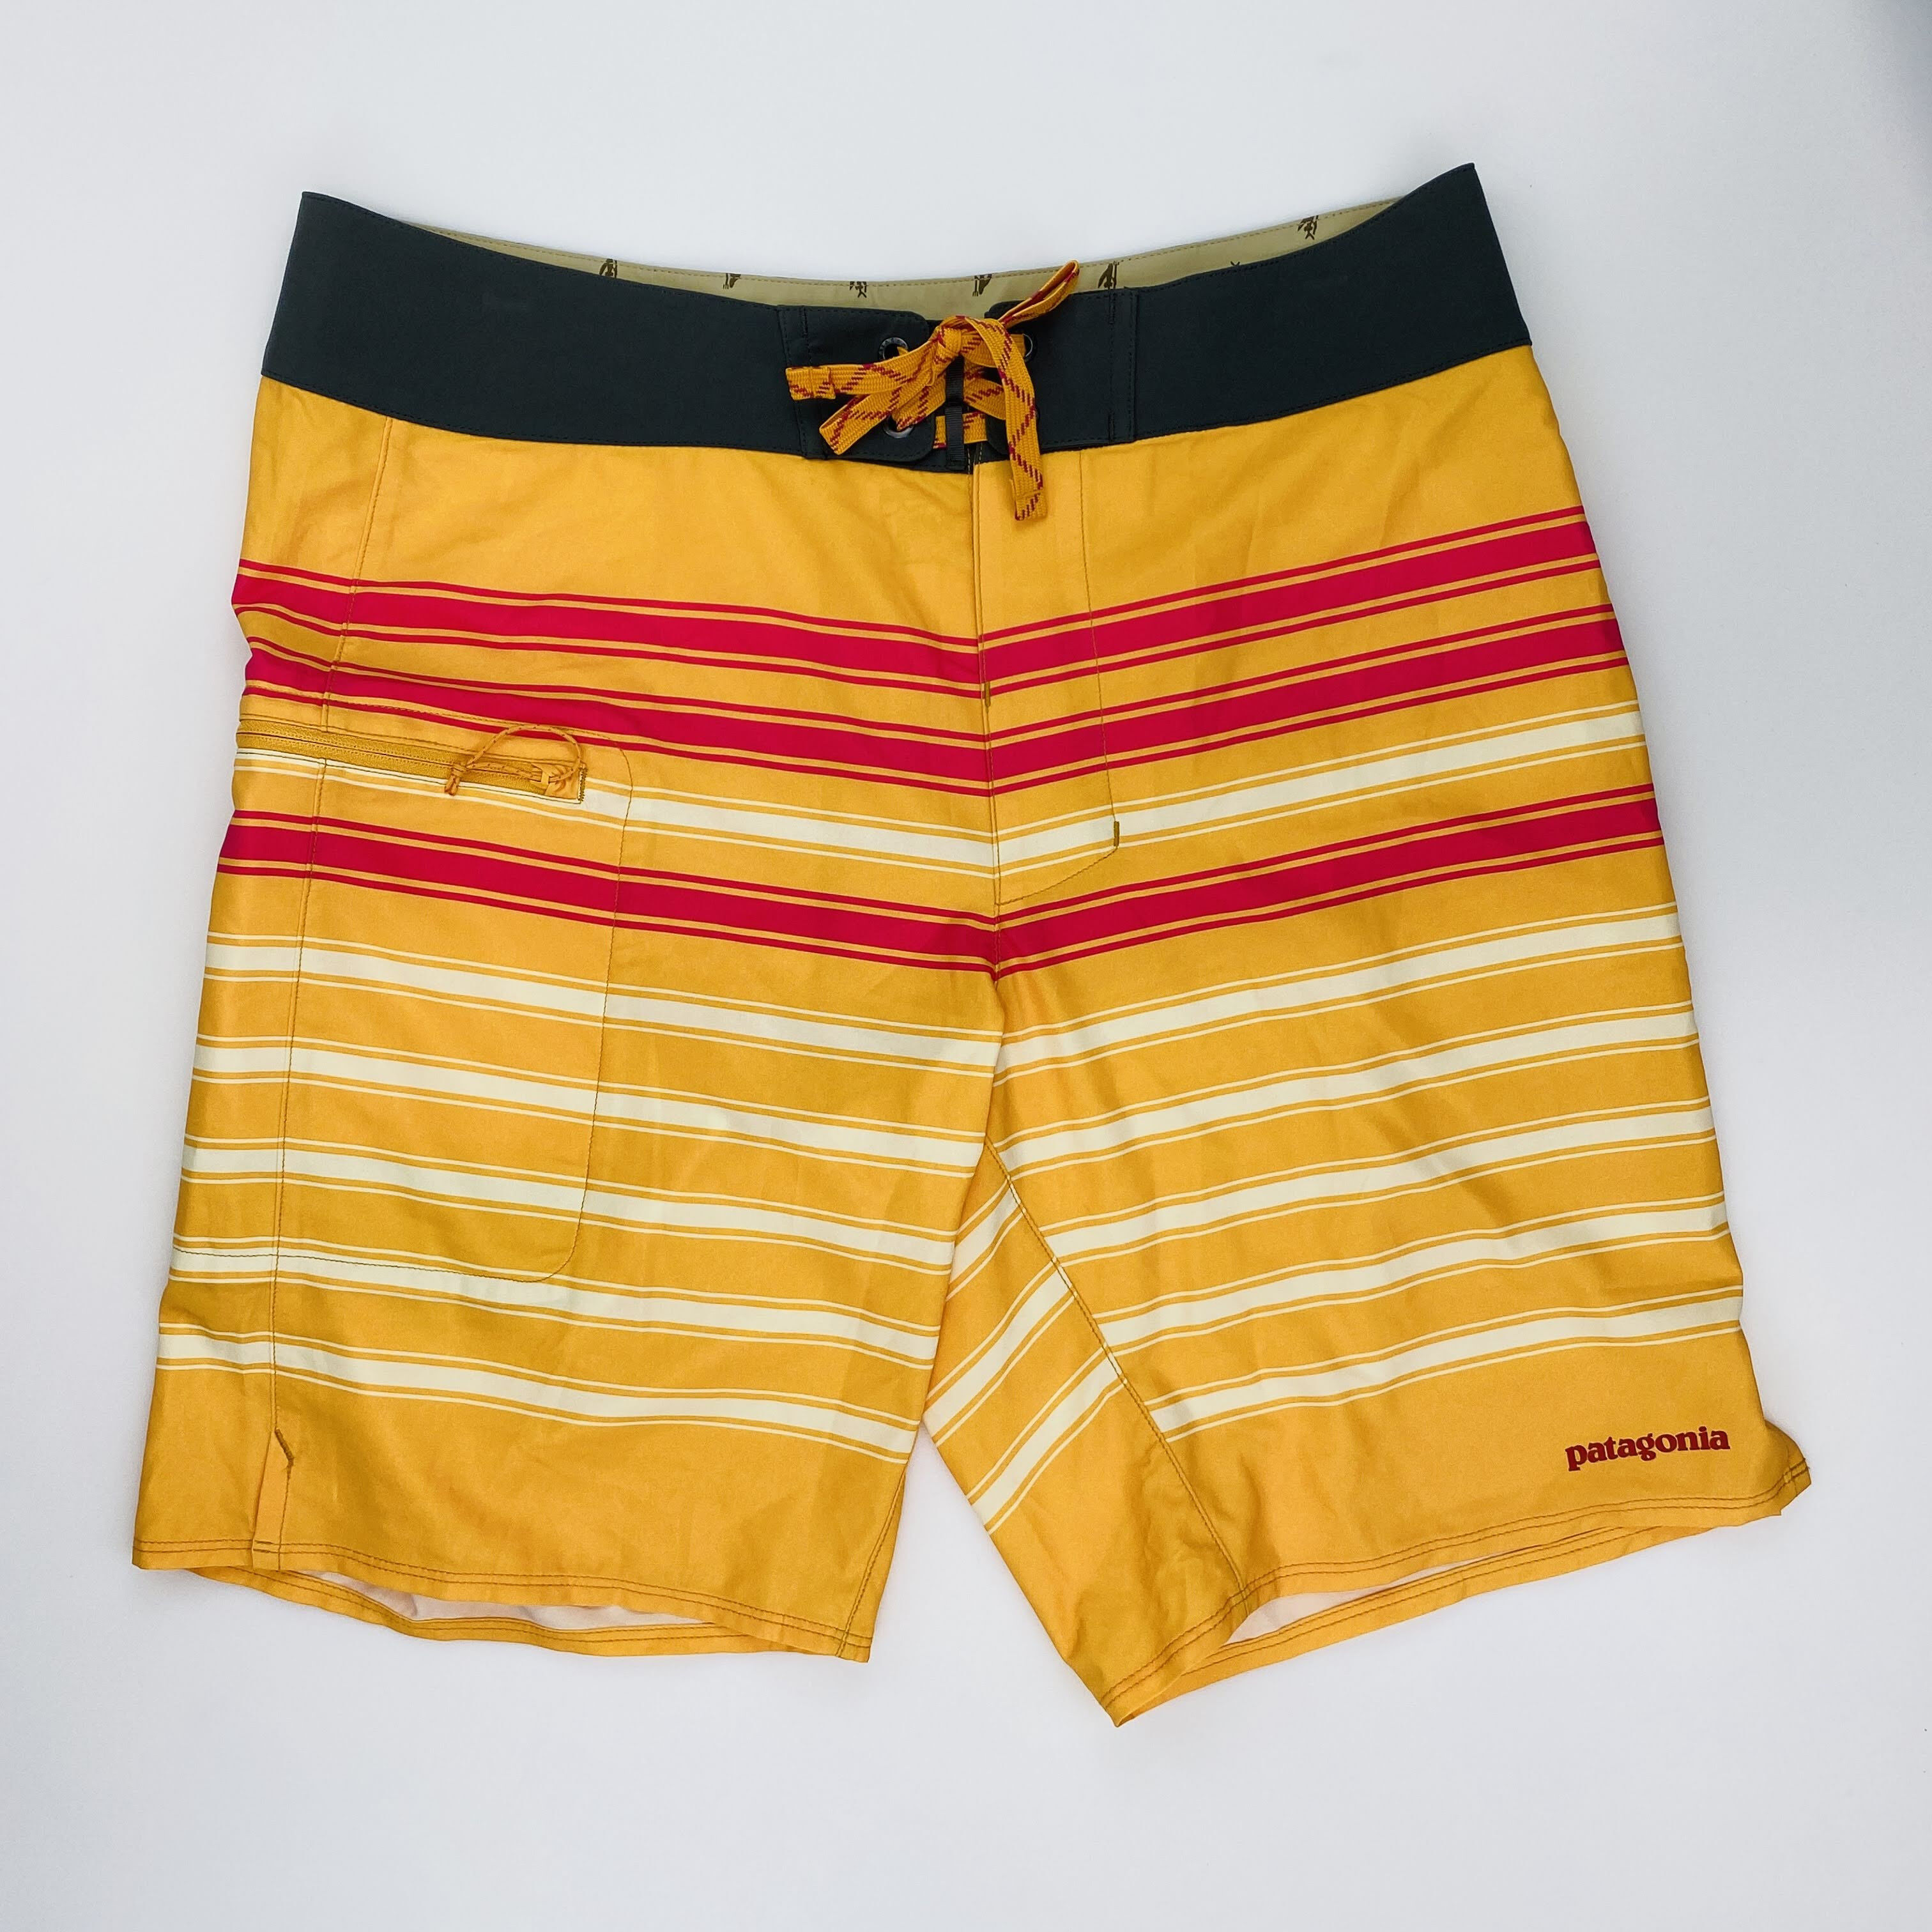 Patagonia M's Stretch Planing Boardshorts - 19 in. - Second Hand Shorts - Herren - Mehrfarbig - 42 | Hardloop